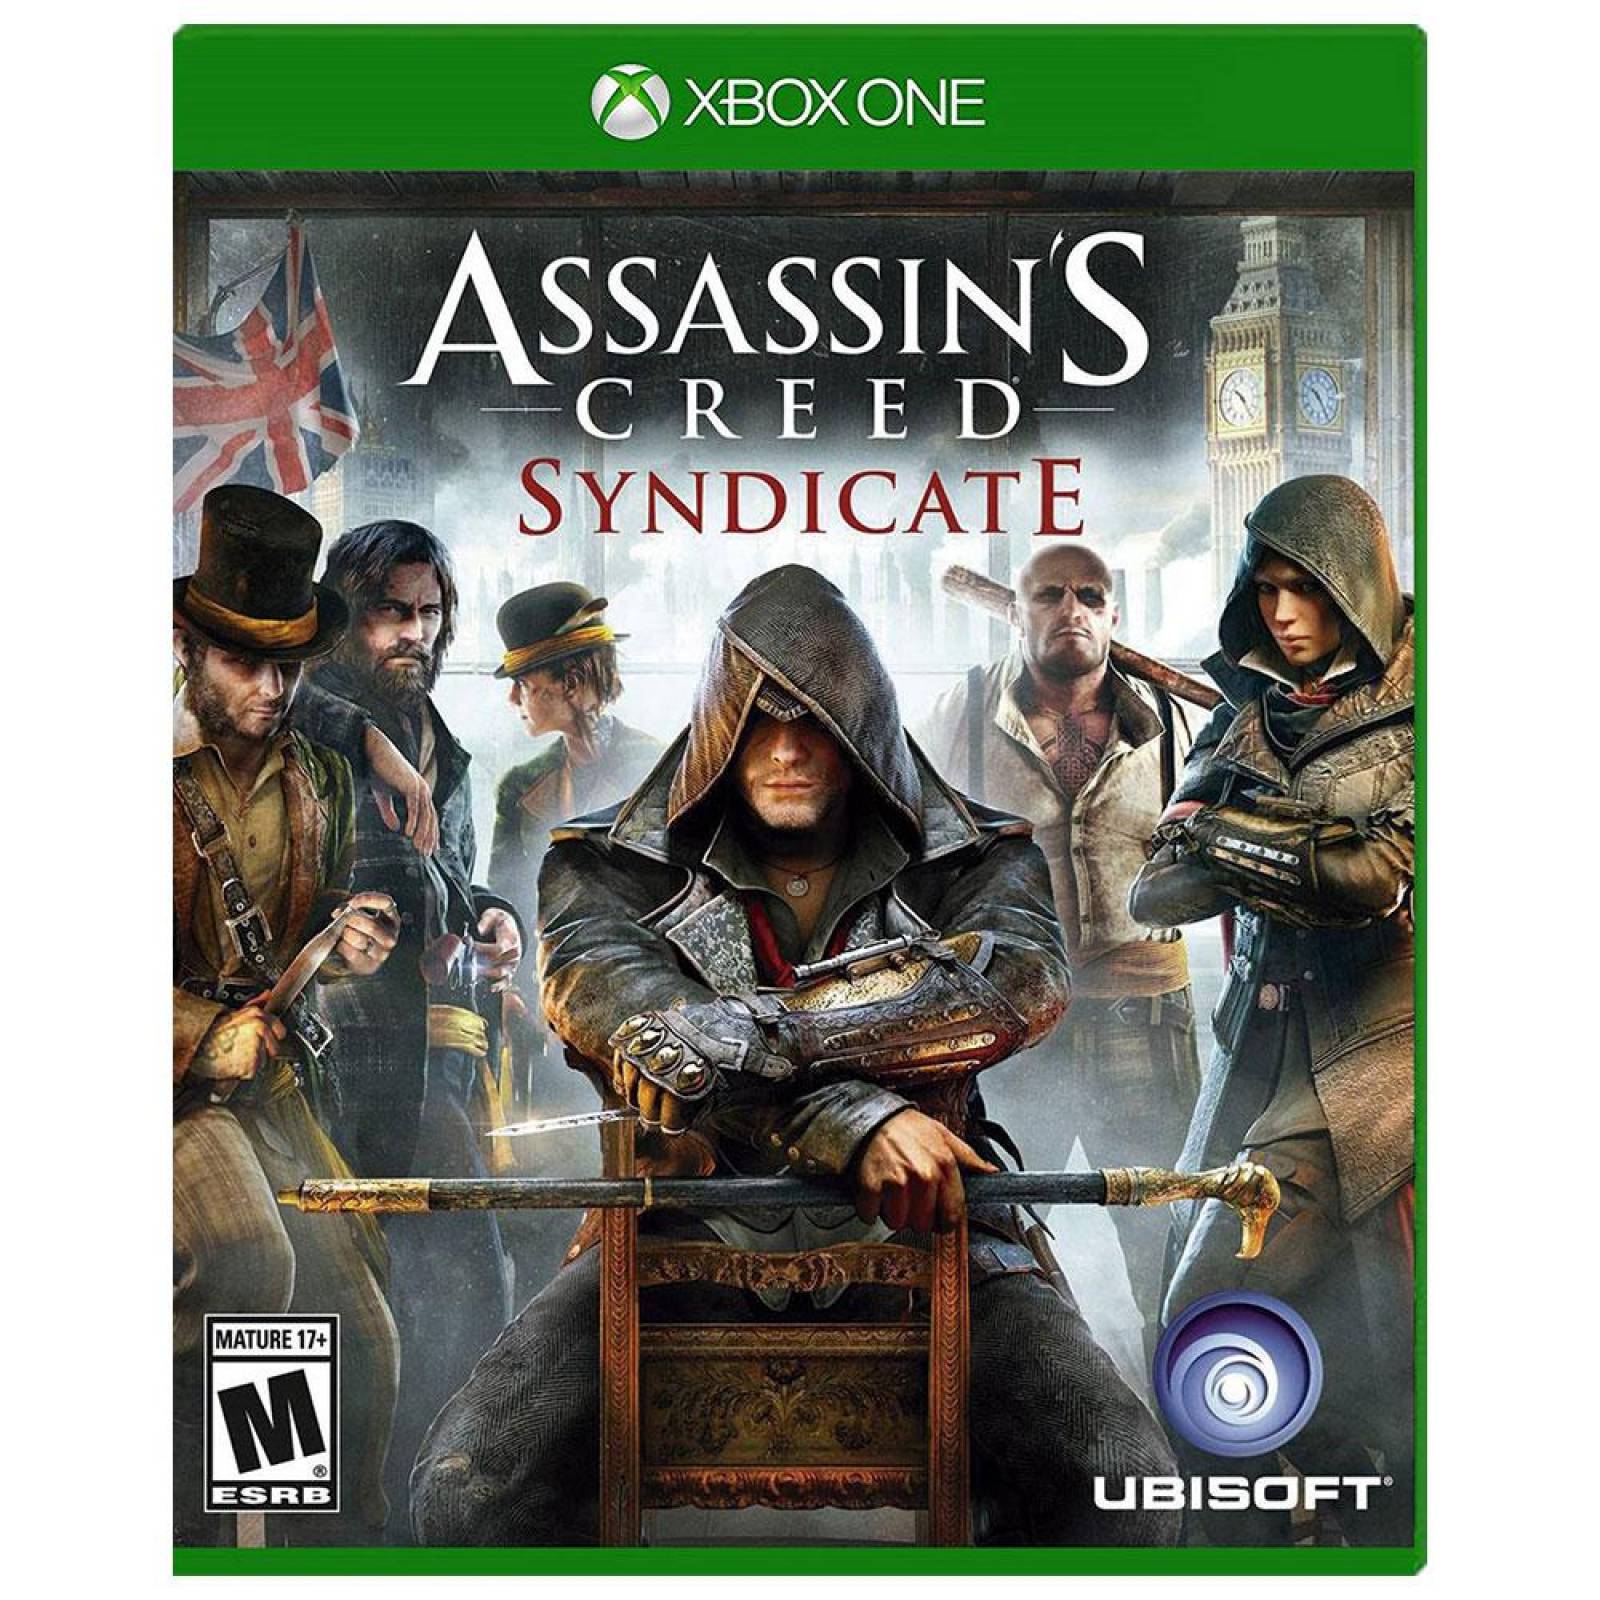 Assassins Creed Syndicate Xbox One - S001 